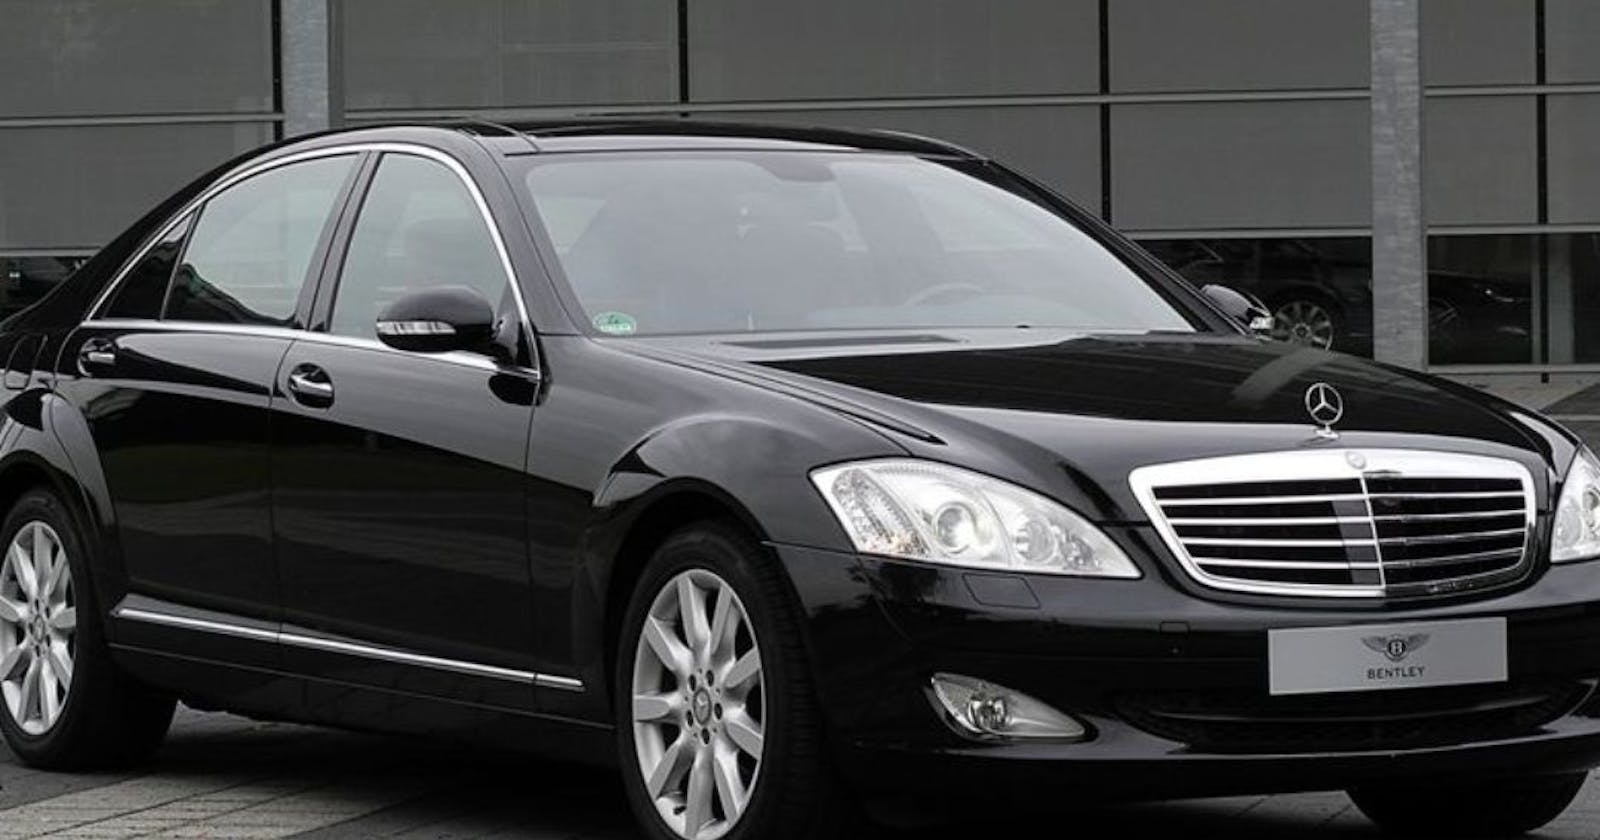 Find the top notch and reliable Global Chauffeur Services